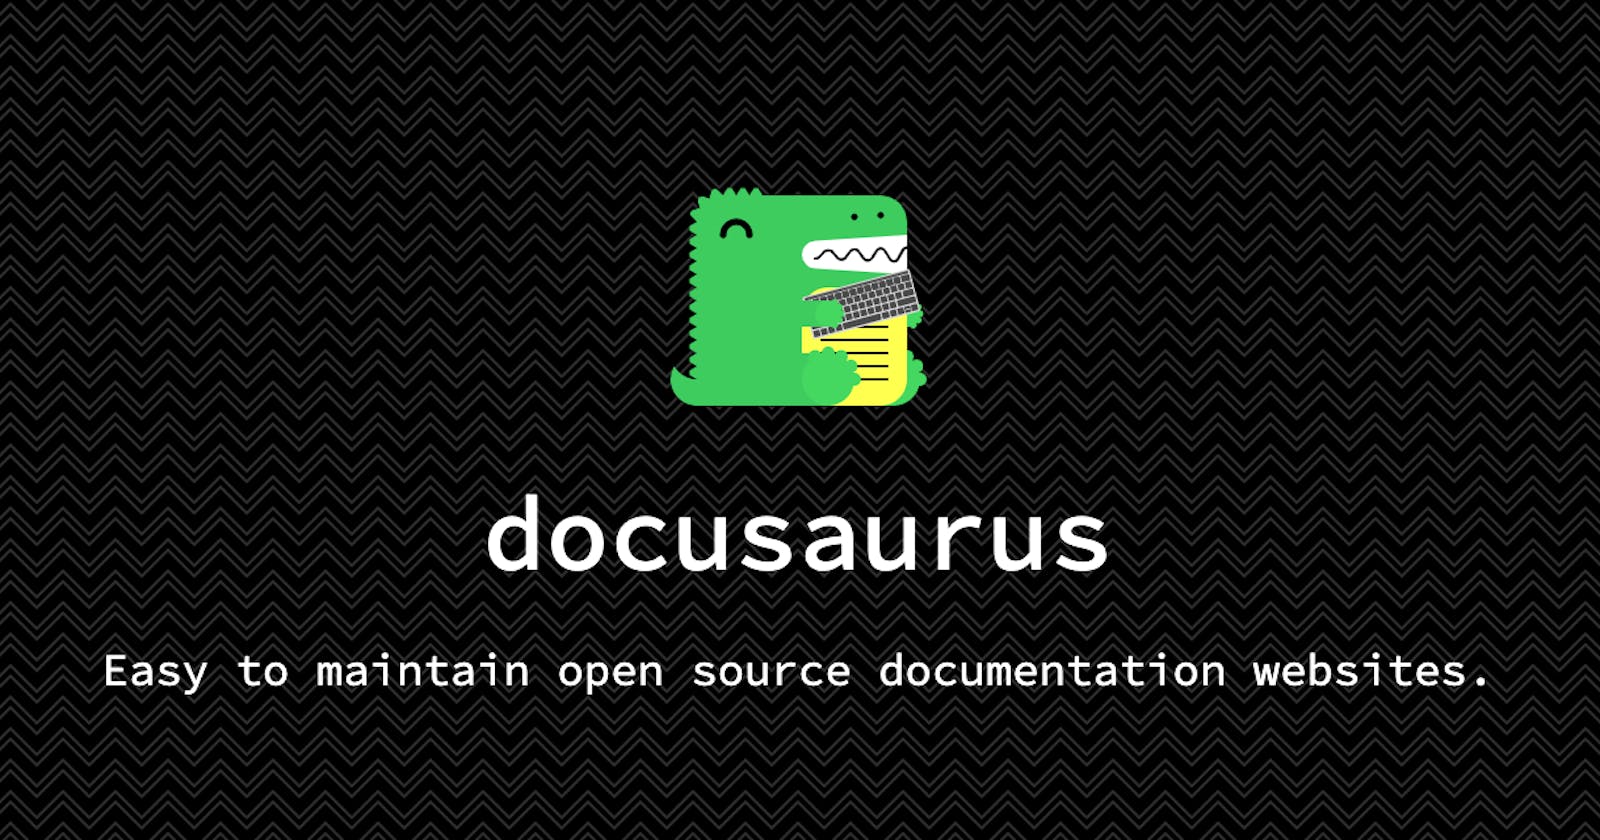 How To Document With Docusaurus